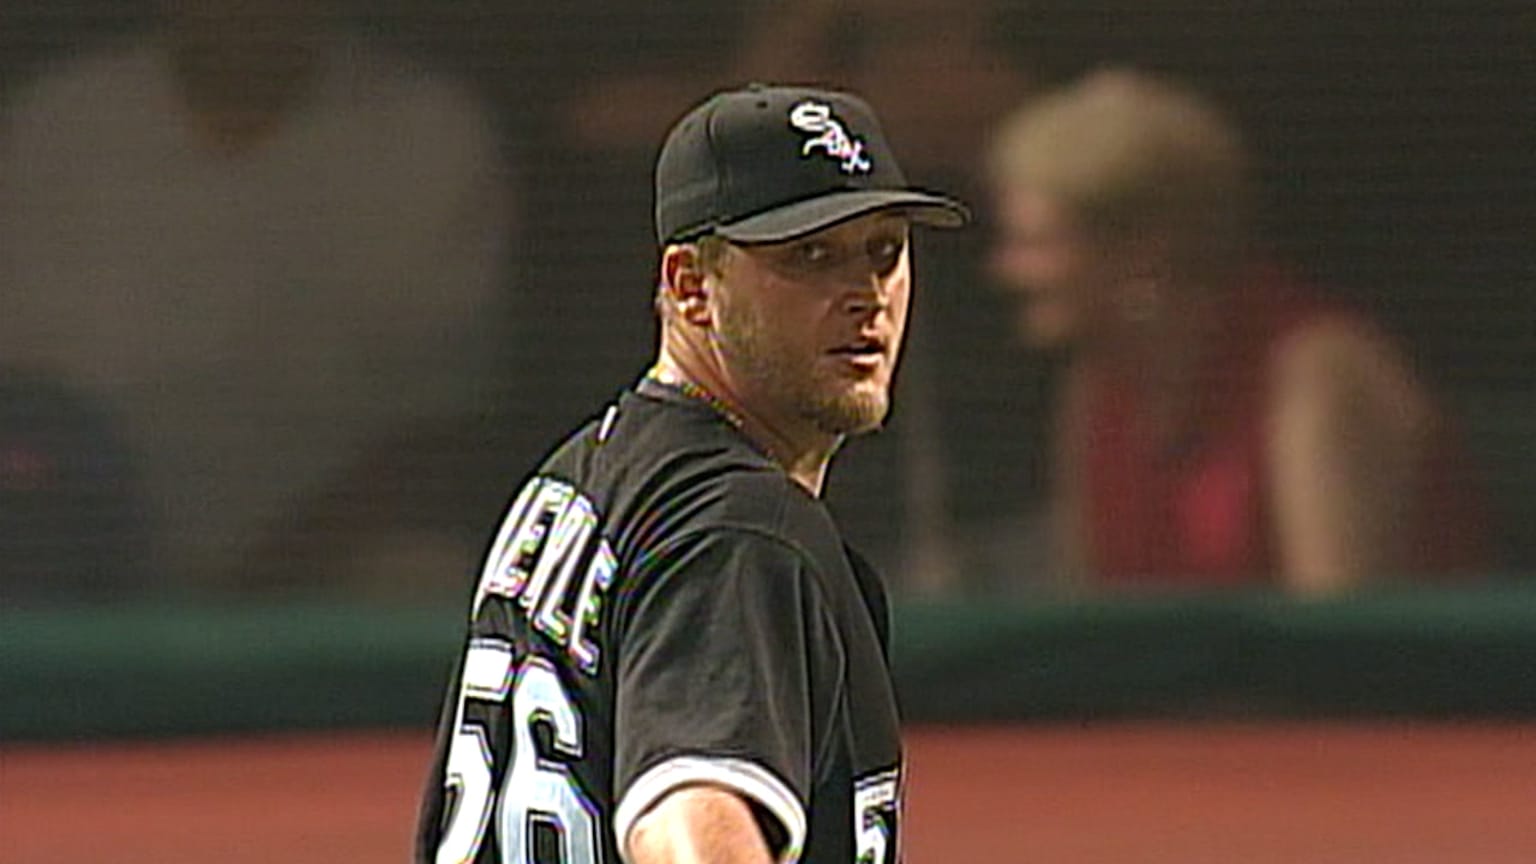 Mark Buehrle Gifts & Merchandise for Sale